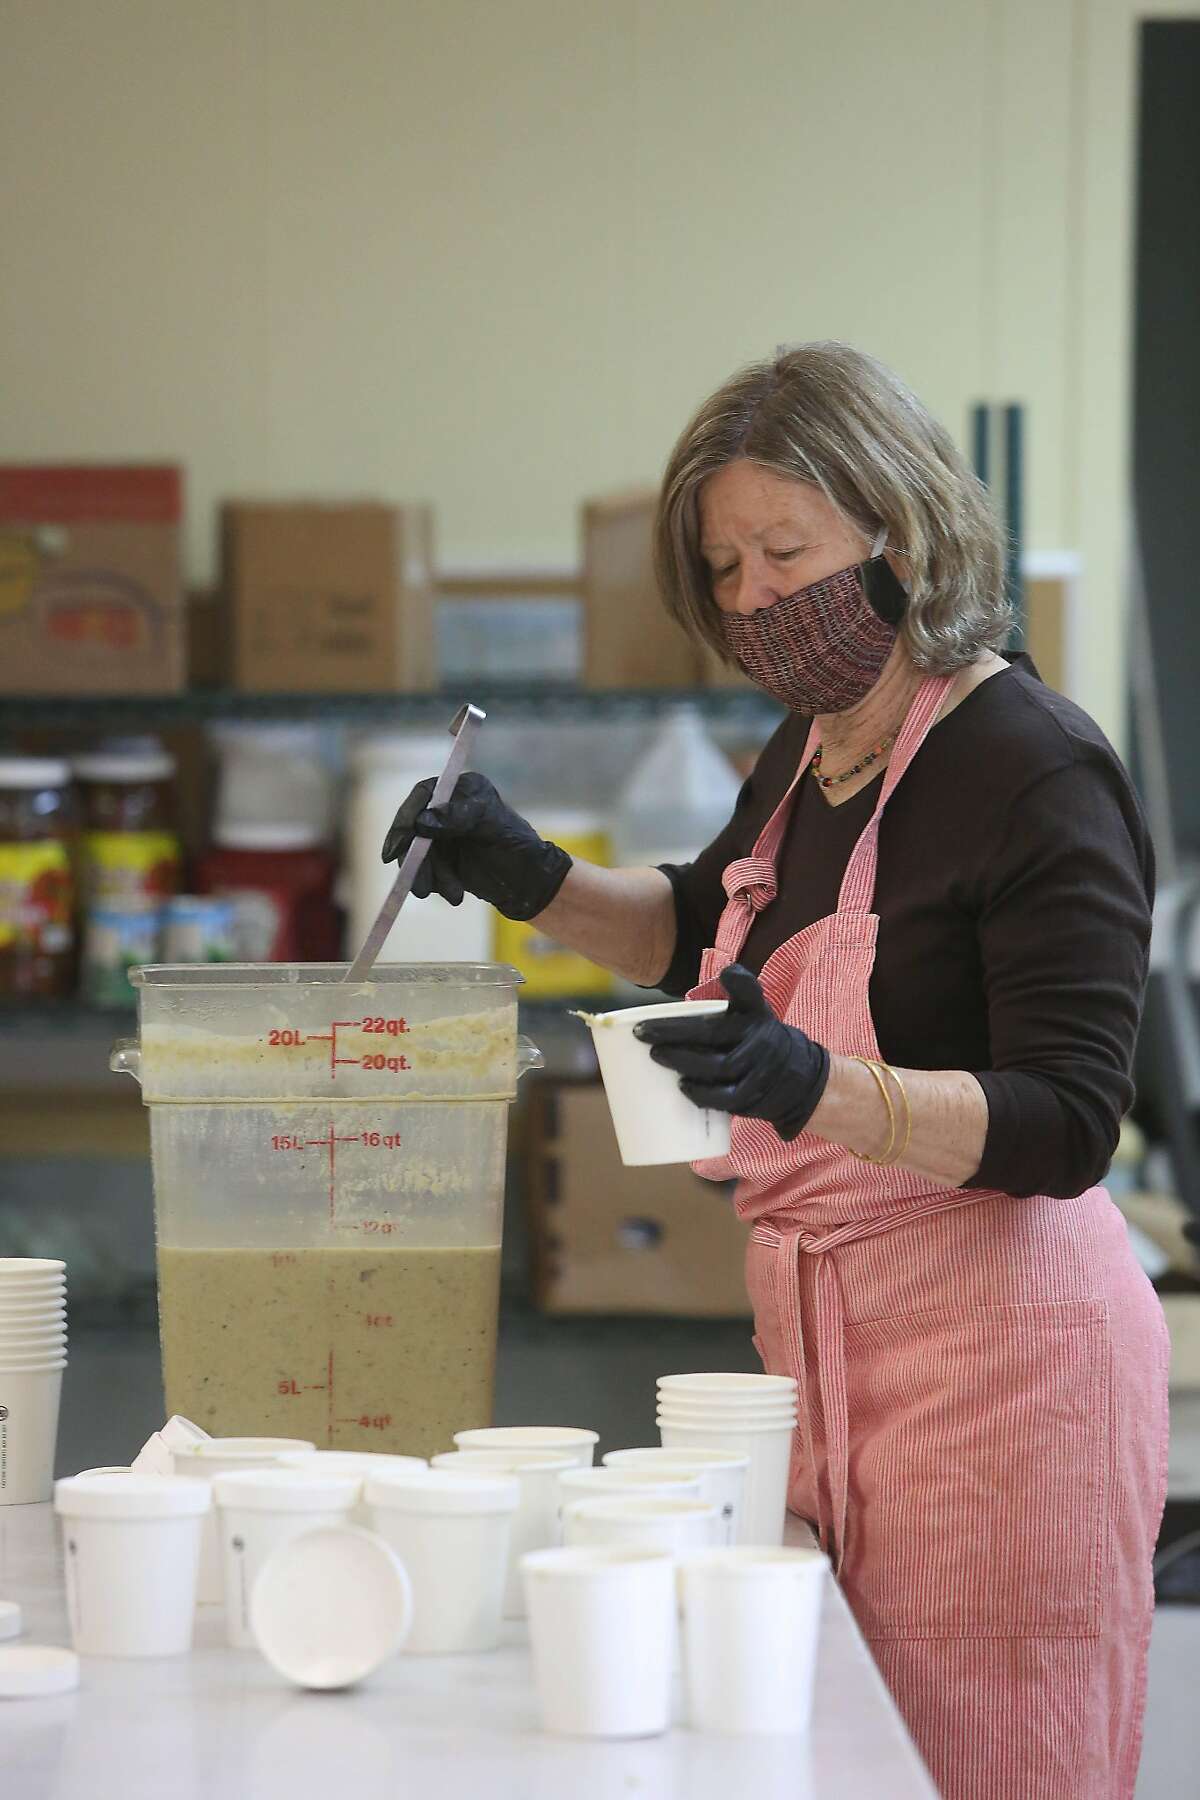 Anne Hatch, Food Runner volunteer, prepares food for delivery as she works in the new Food Runners’ kitchen at the Waller Center in San Franciscon Monday, April 20, 2020 in San Francisco, Calif.